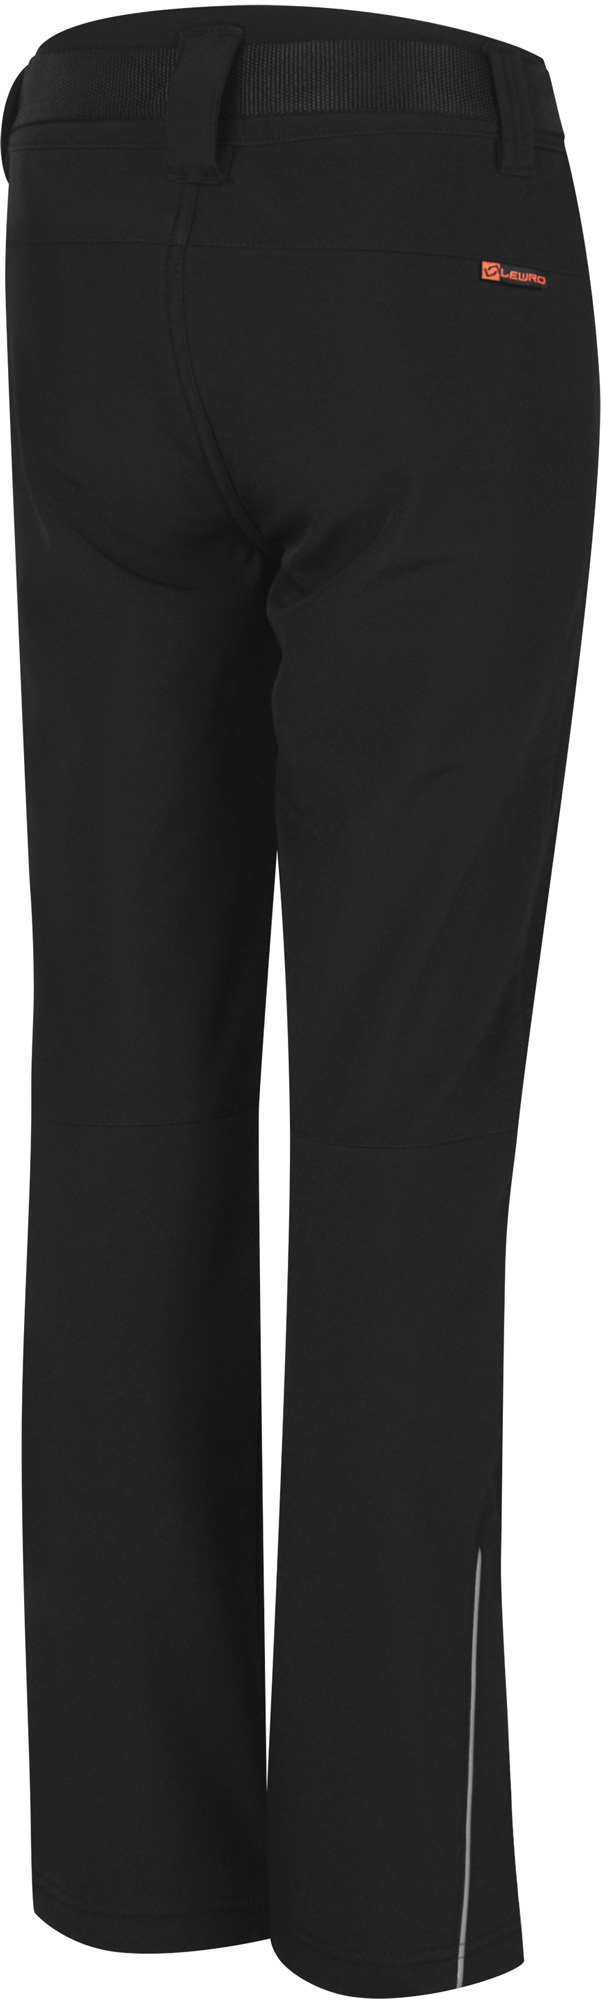 Children’s softshell trousers